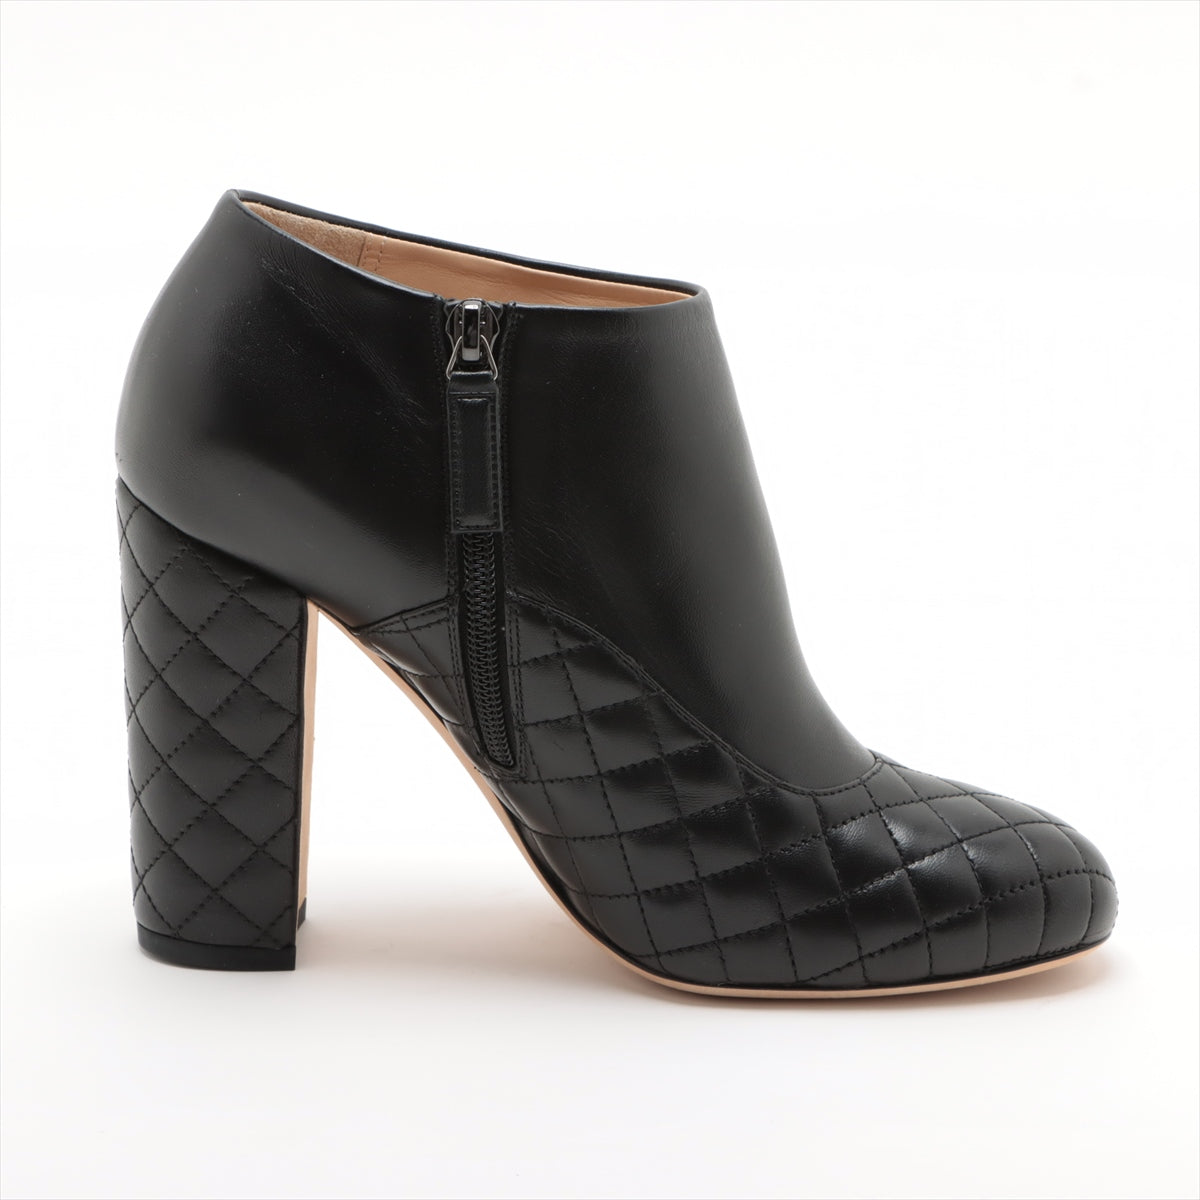 Chanel Coco Mark Leather Short Boots 39C Ladies' Black G31626 Matelasse Side zip There is a box